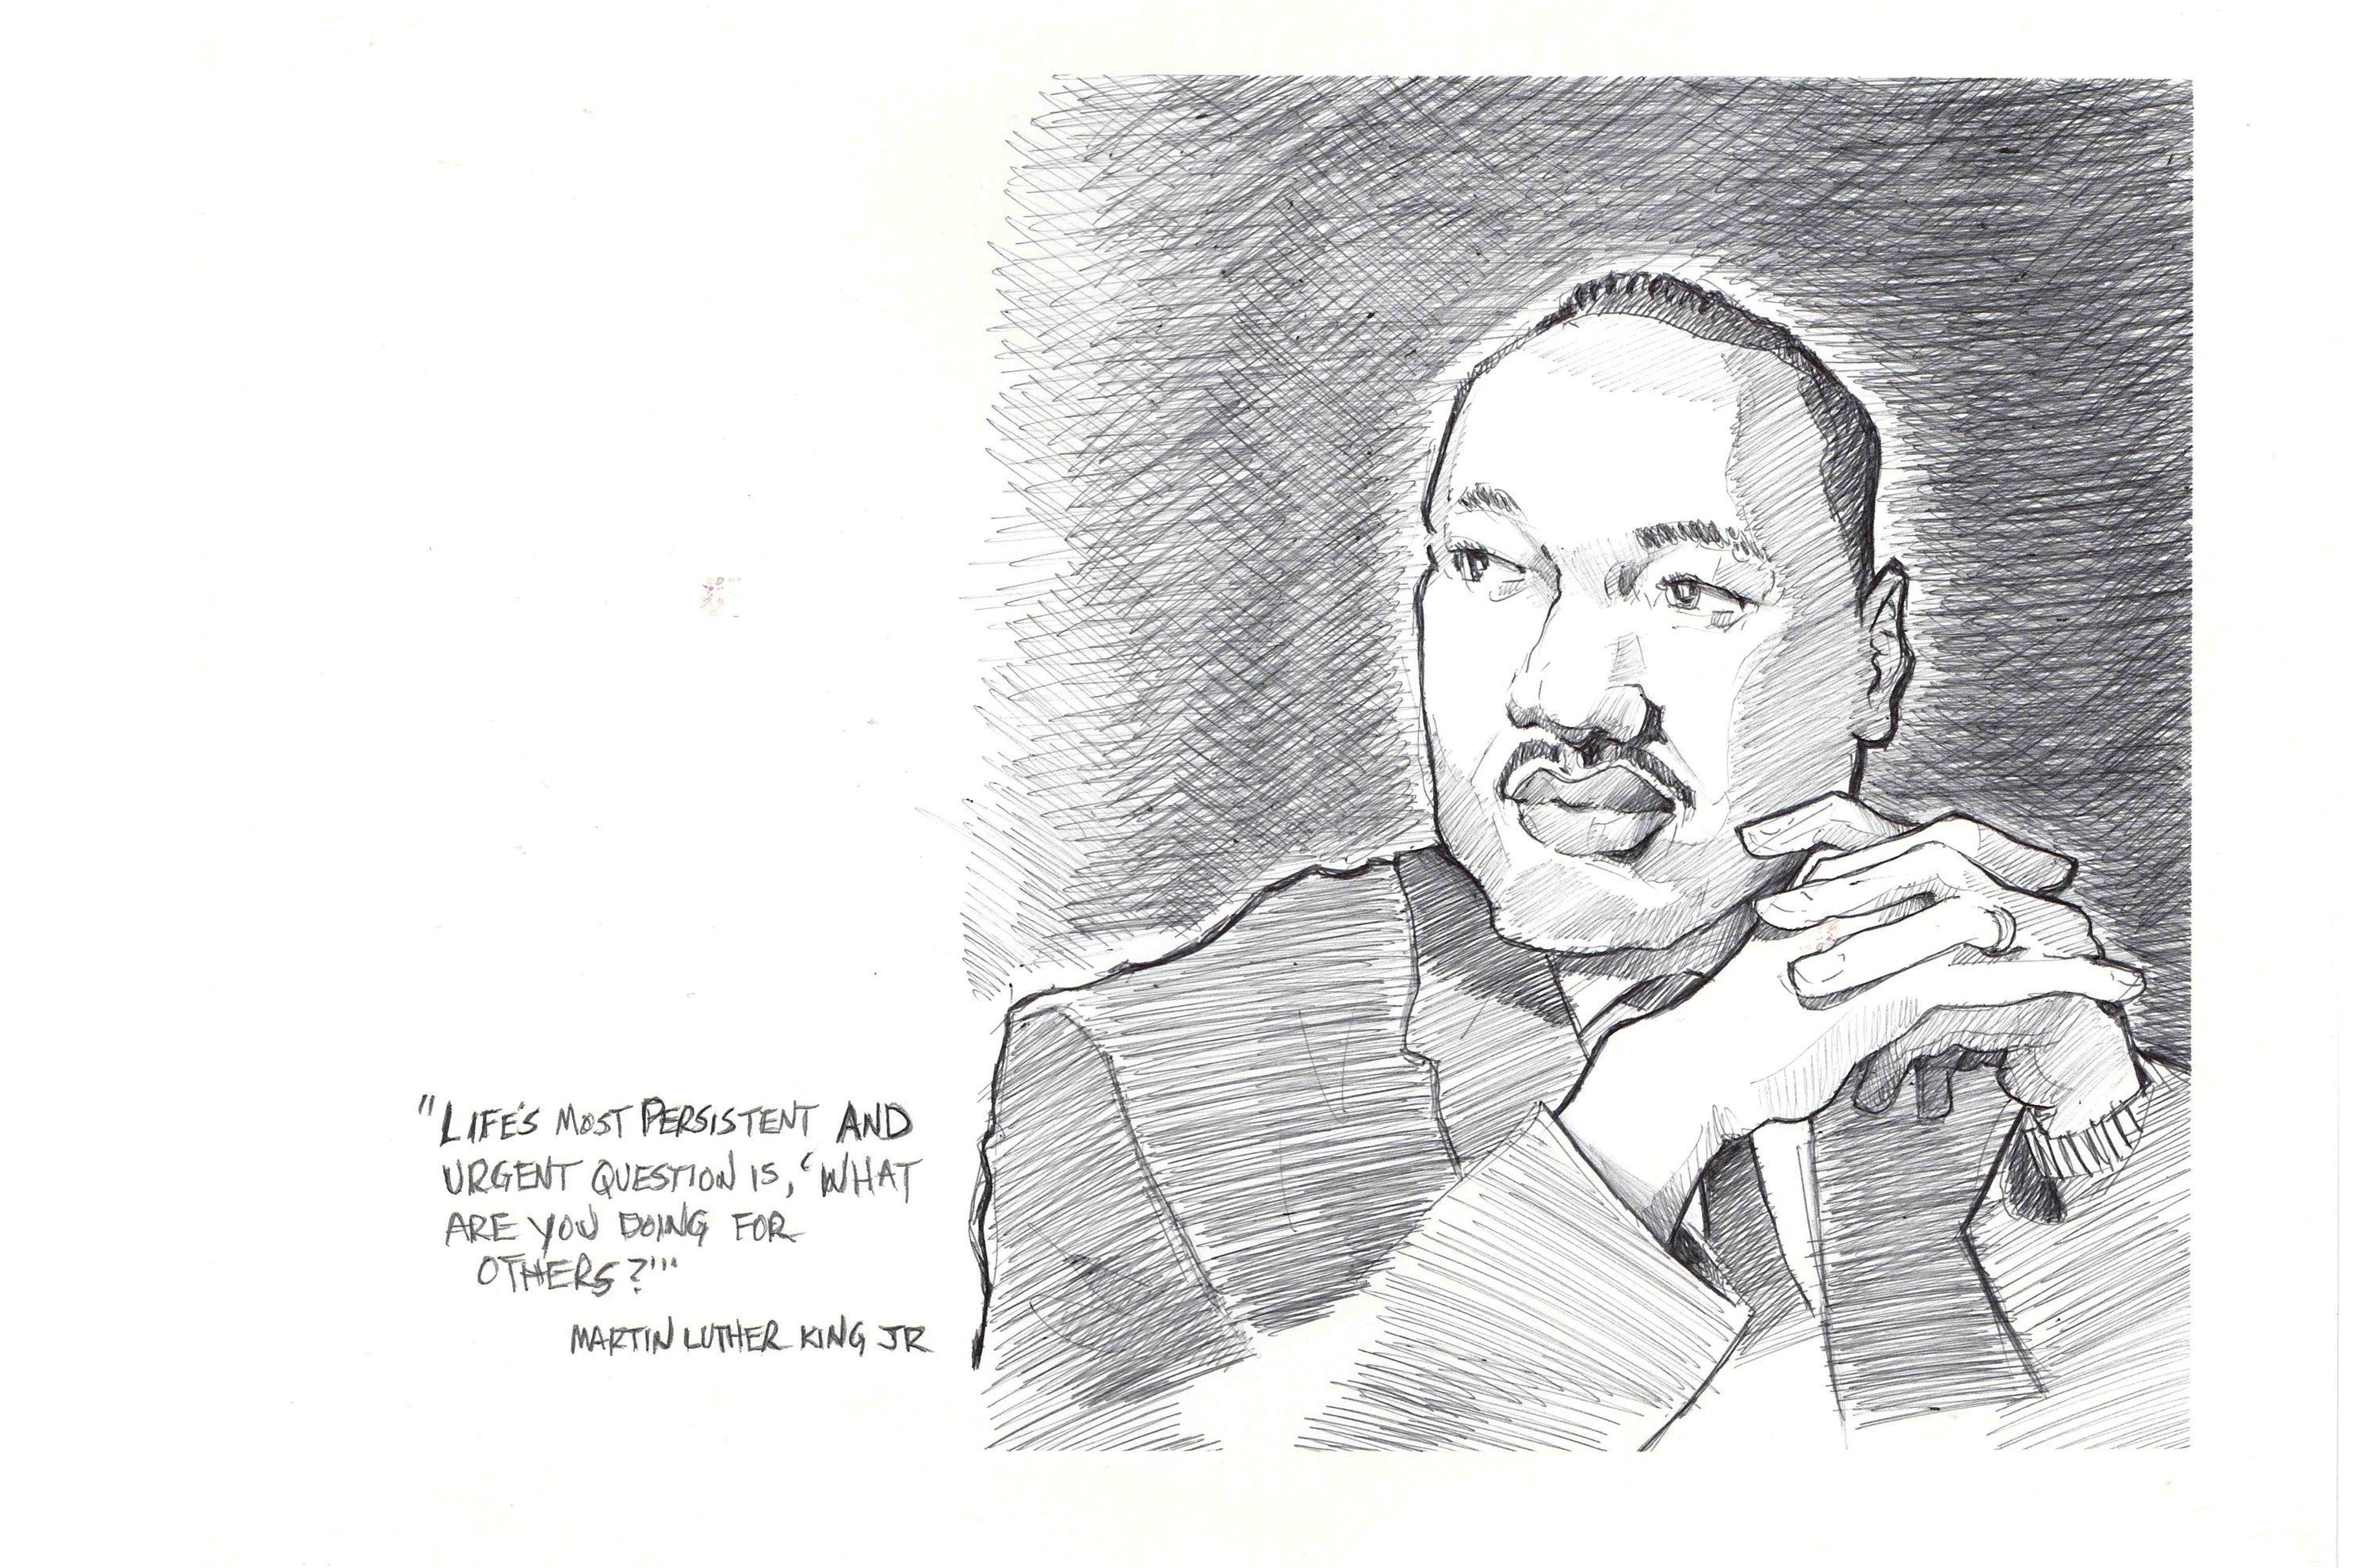 Martin Luther King Jr. (0098) -- Appeared on Jan. 19, 2021